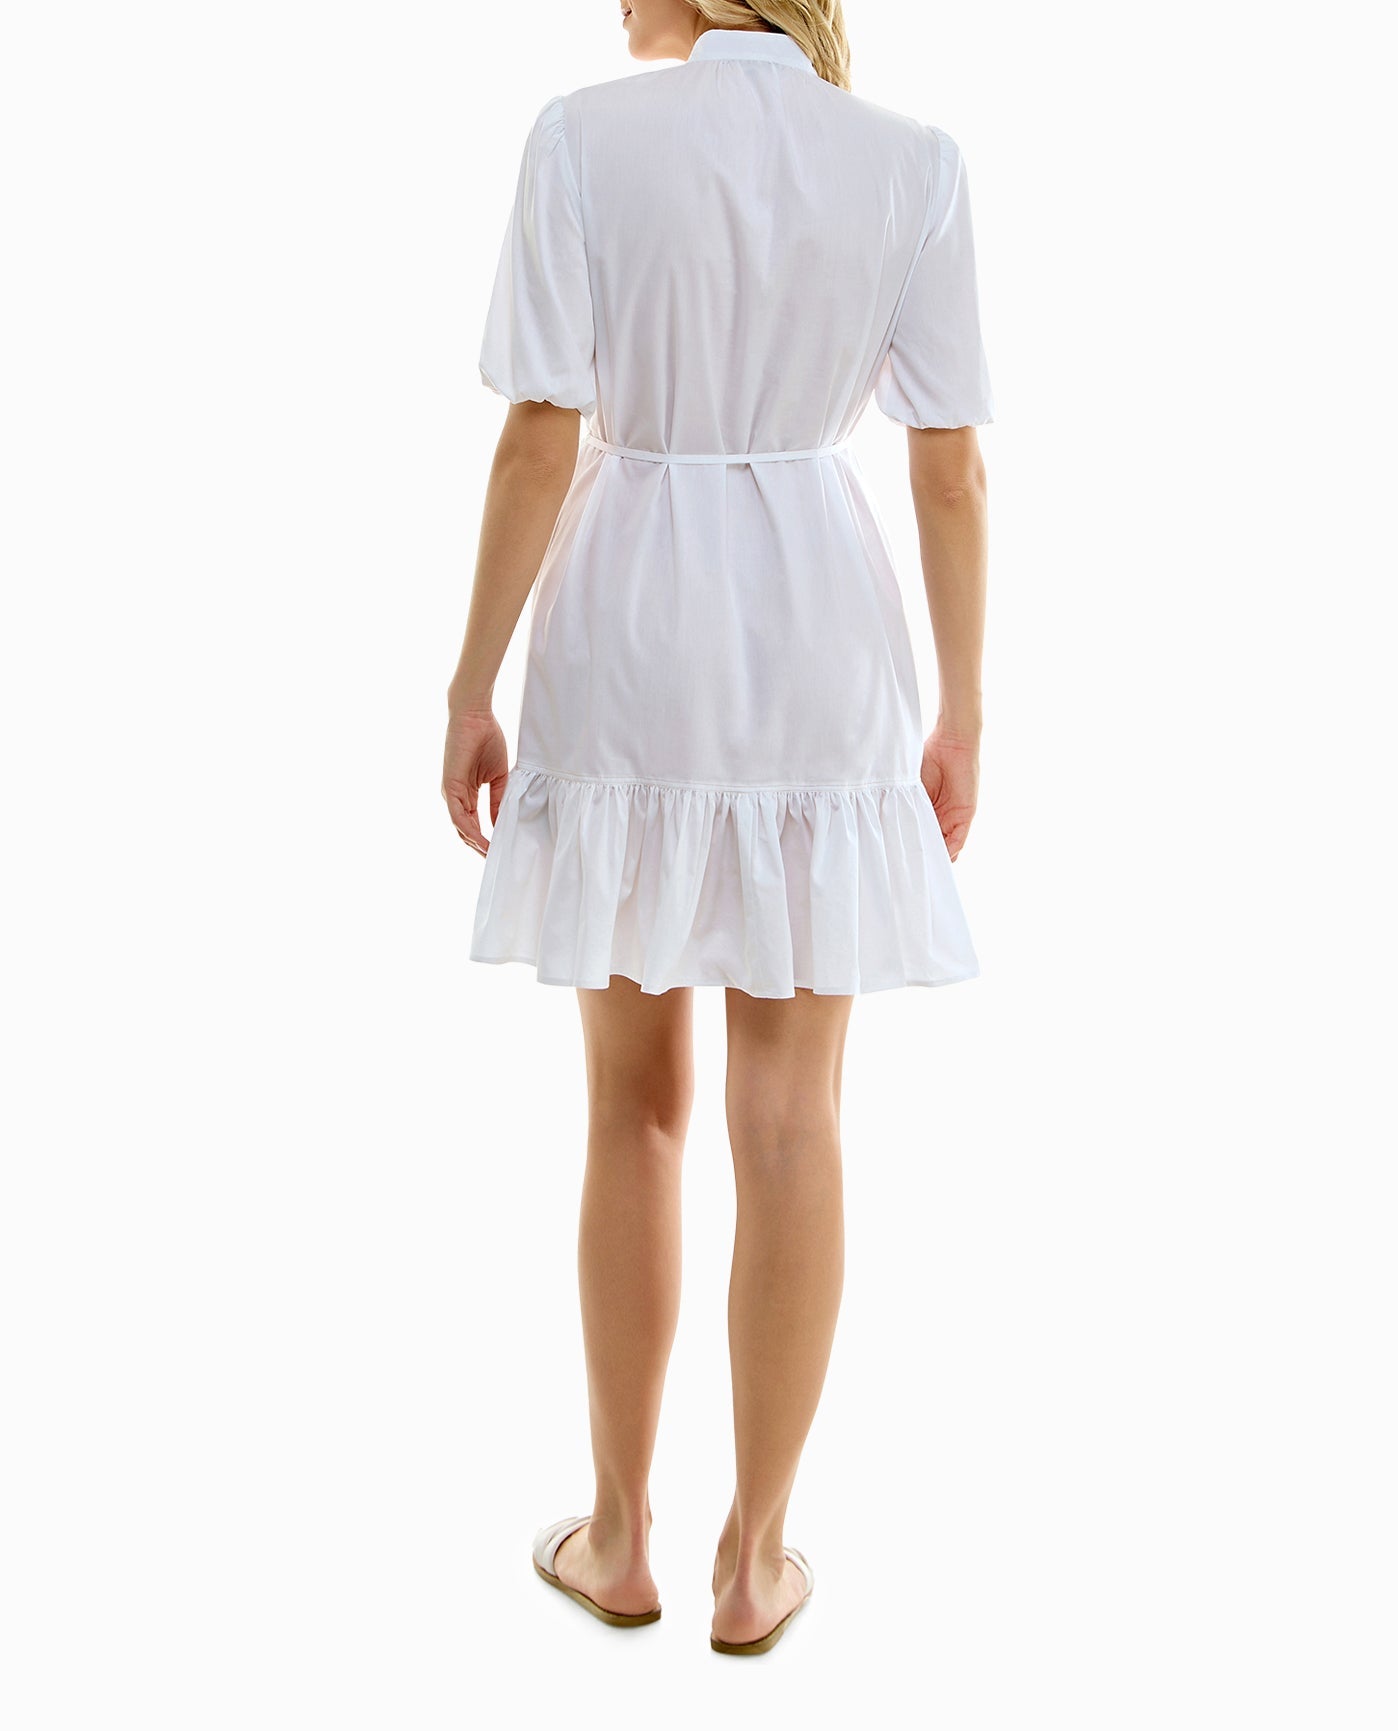 BACK OF CRYSTAL STRETCH POPLIN HALF SLEEVE TIERED SHIRT DRESS | Brilliant White and Sand